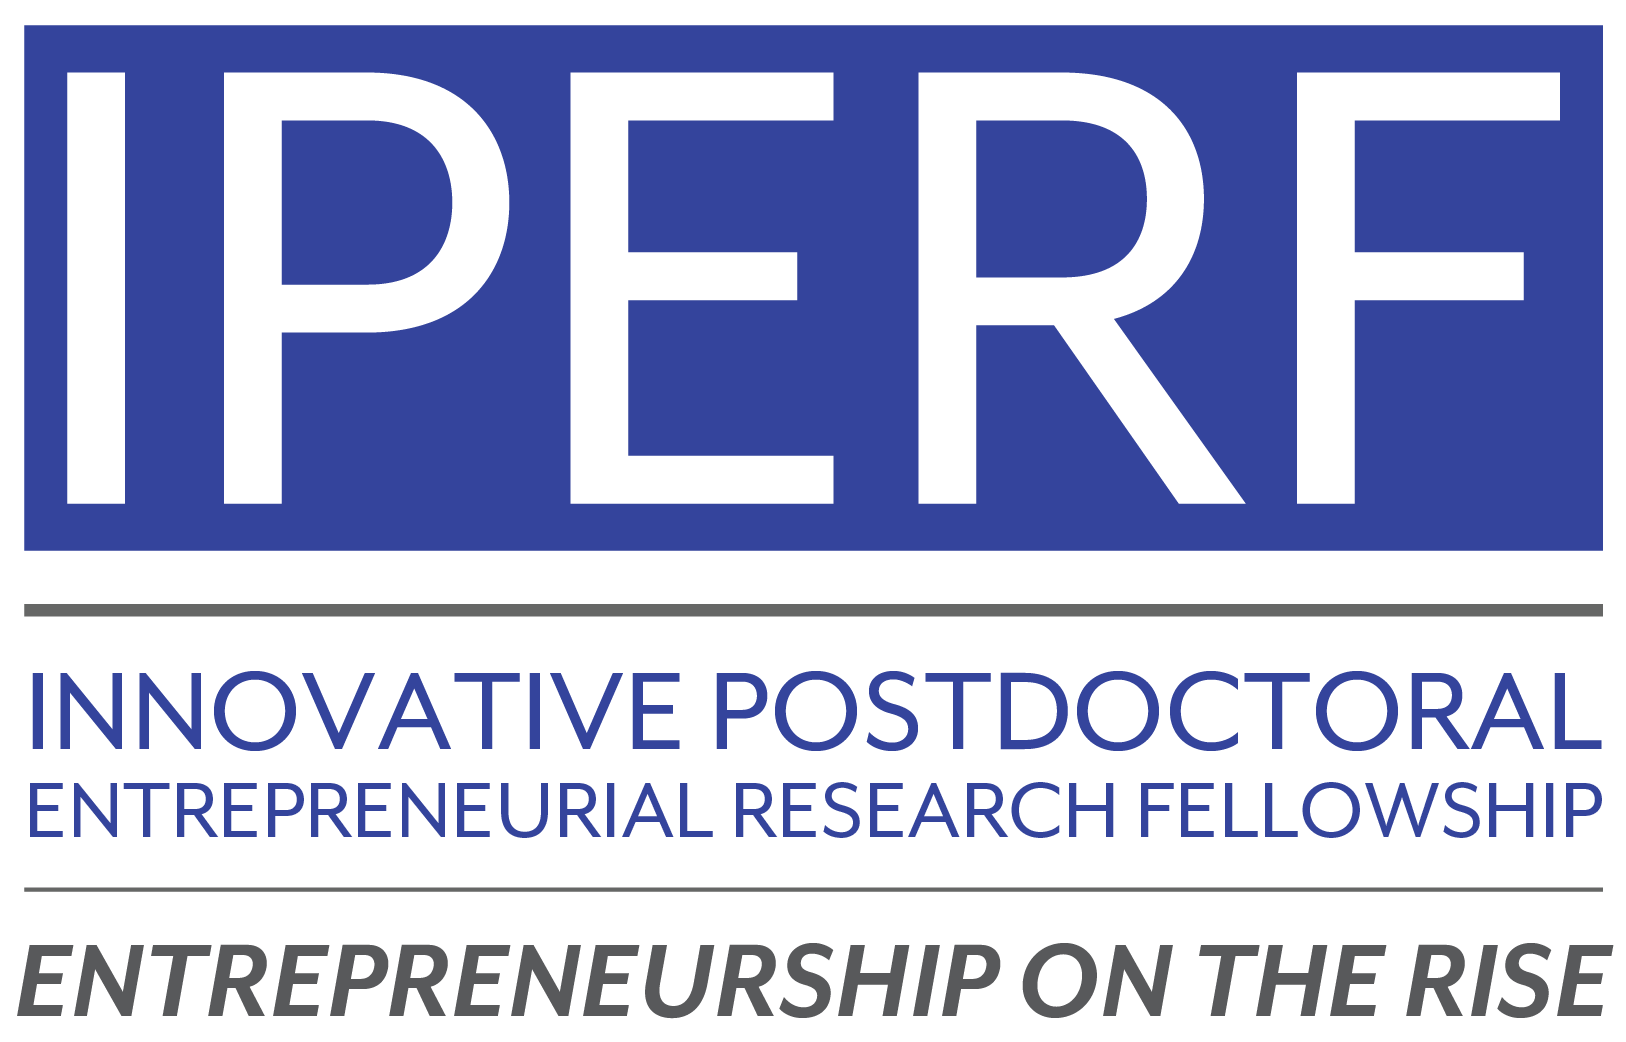 ASEE/NSF Innovative Postdoctoral Research Fellowship (I-PERF)